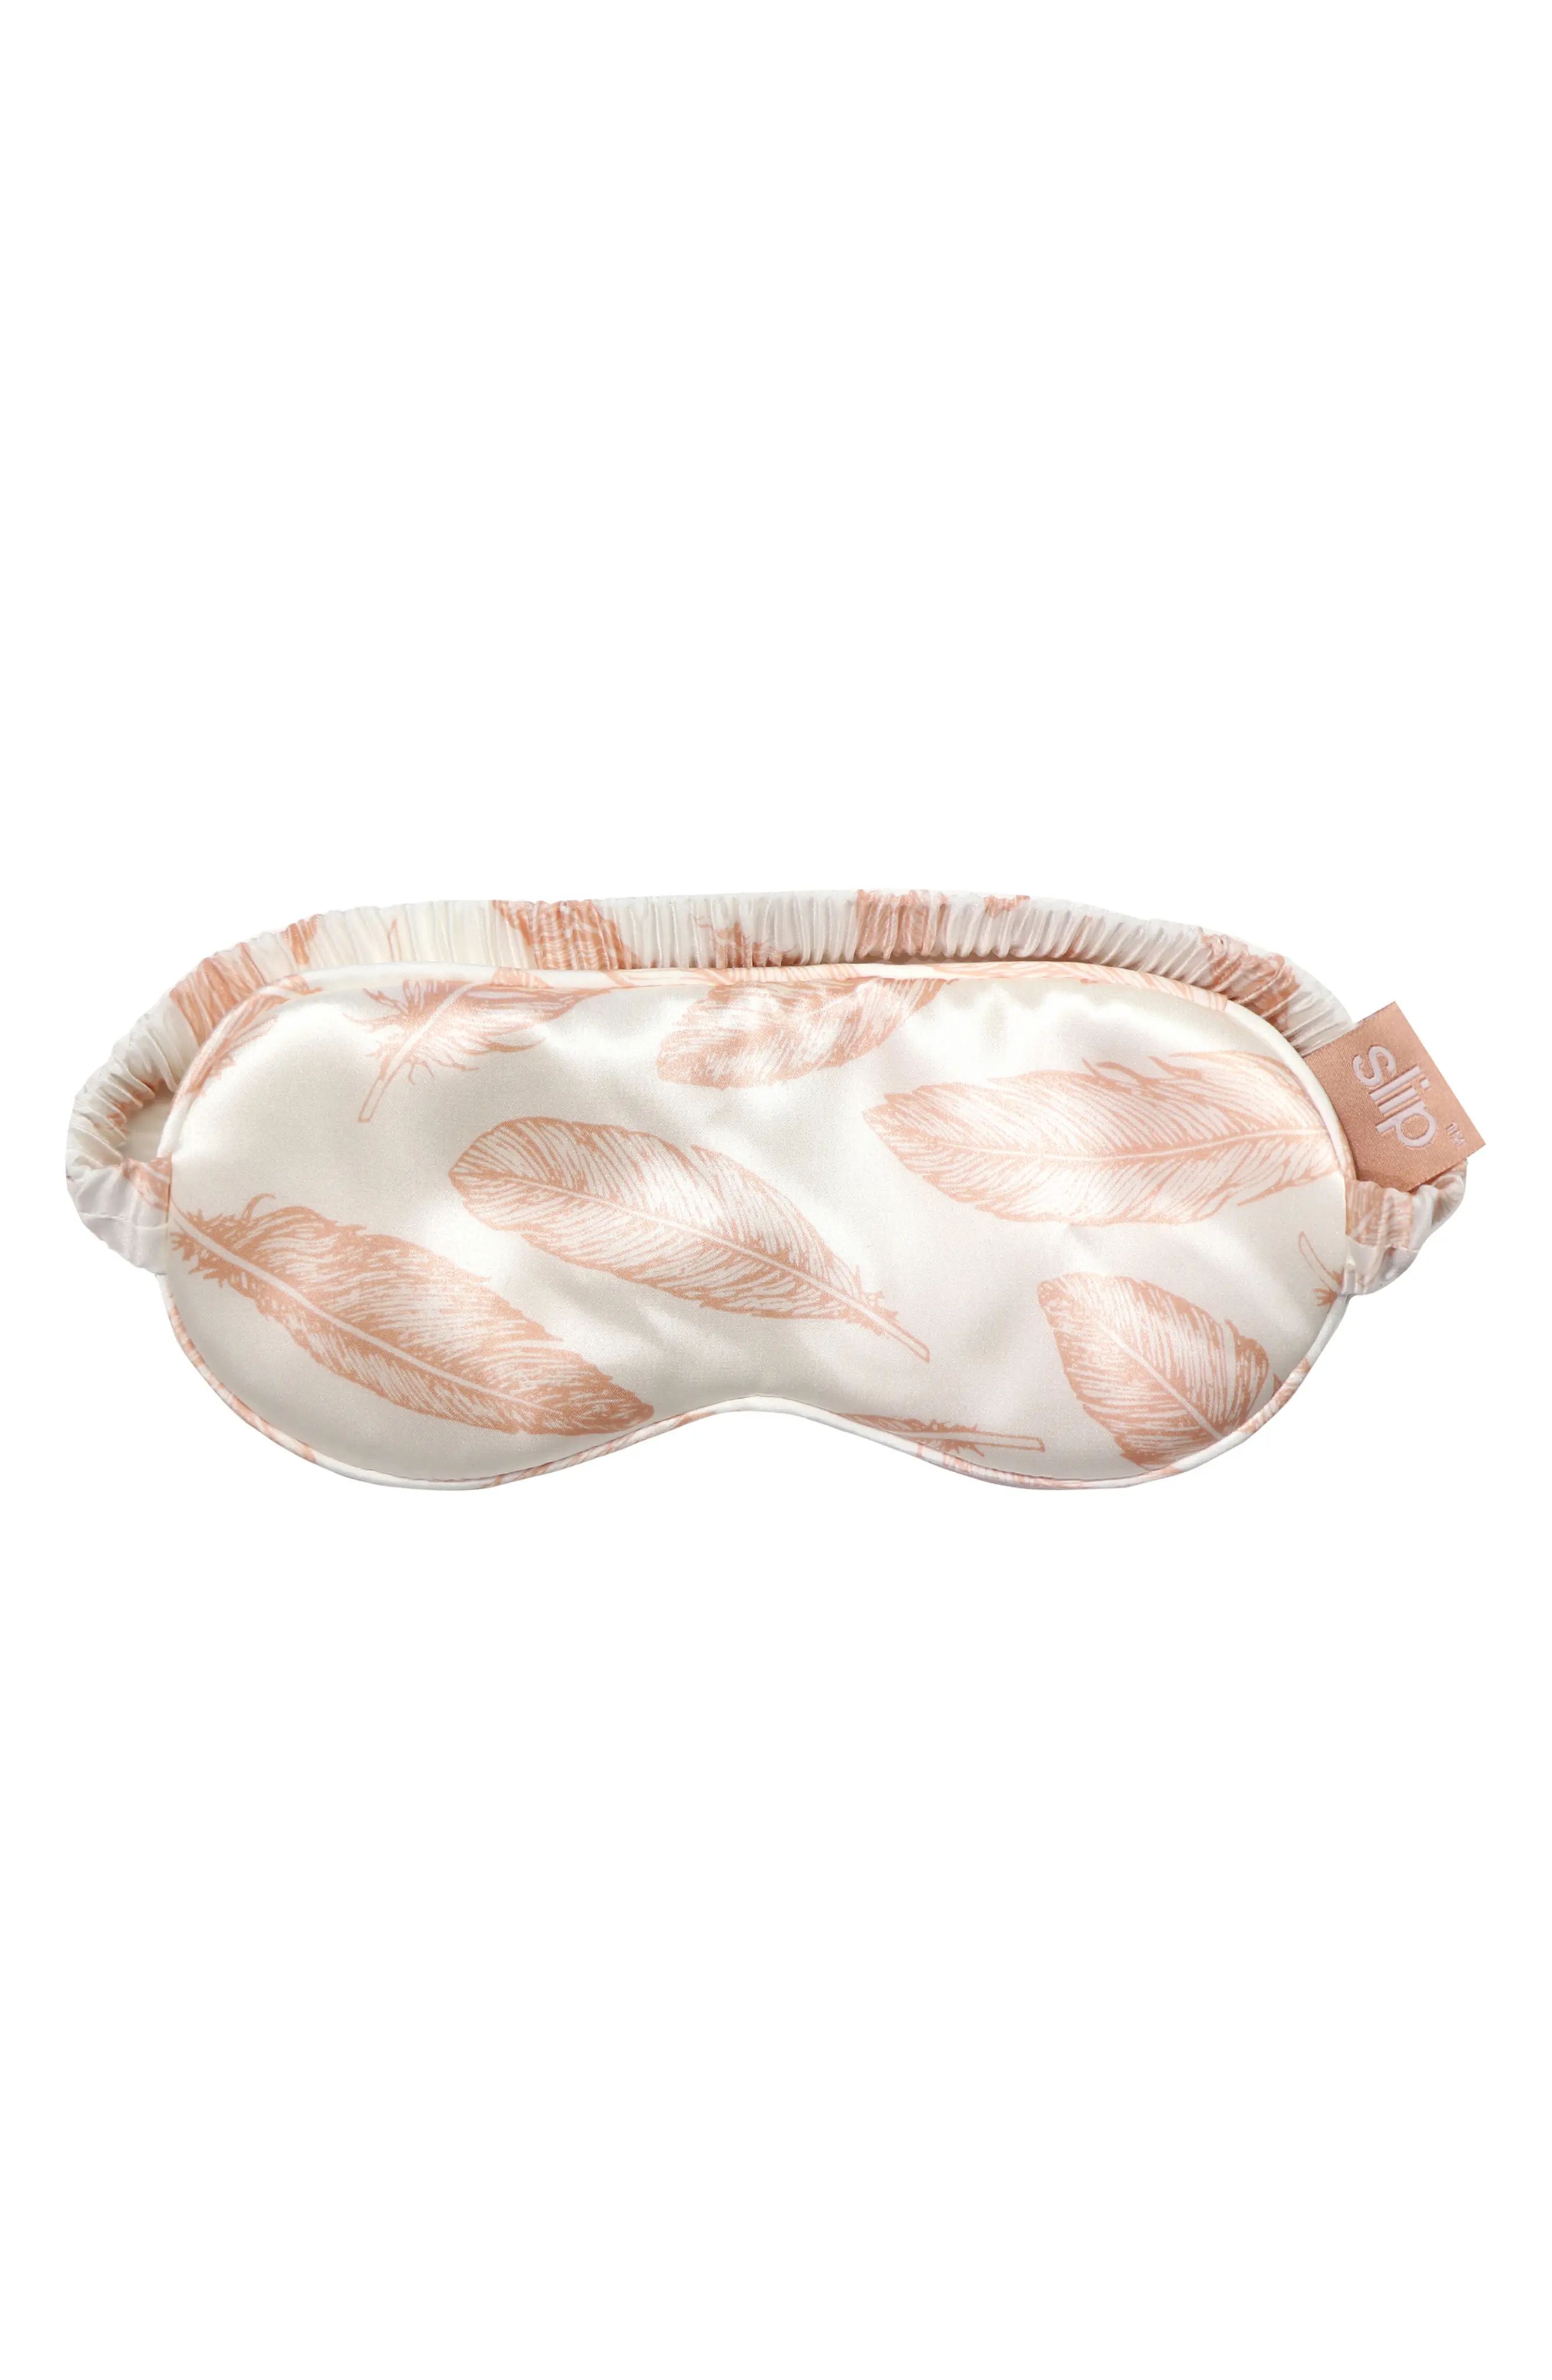 Slip Pure Silk Sleep Mask, Size One Size - Feathers | Nordstrom